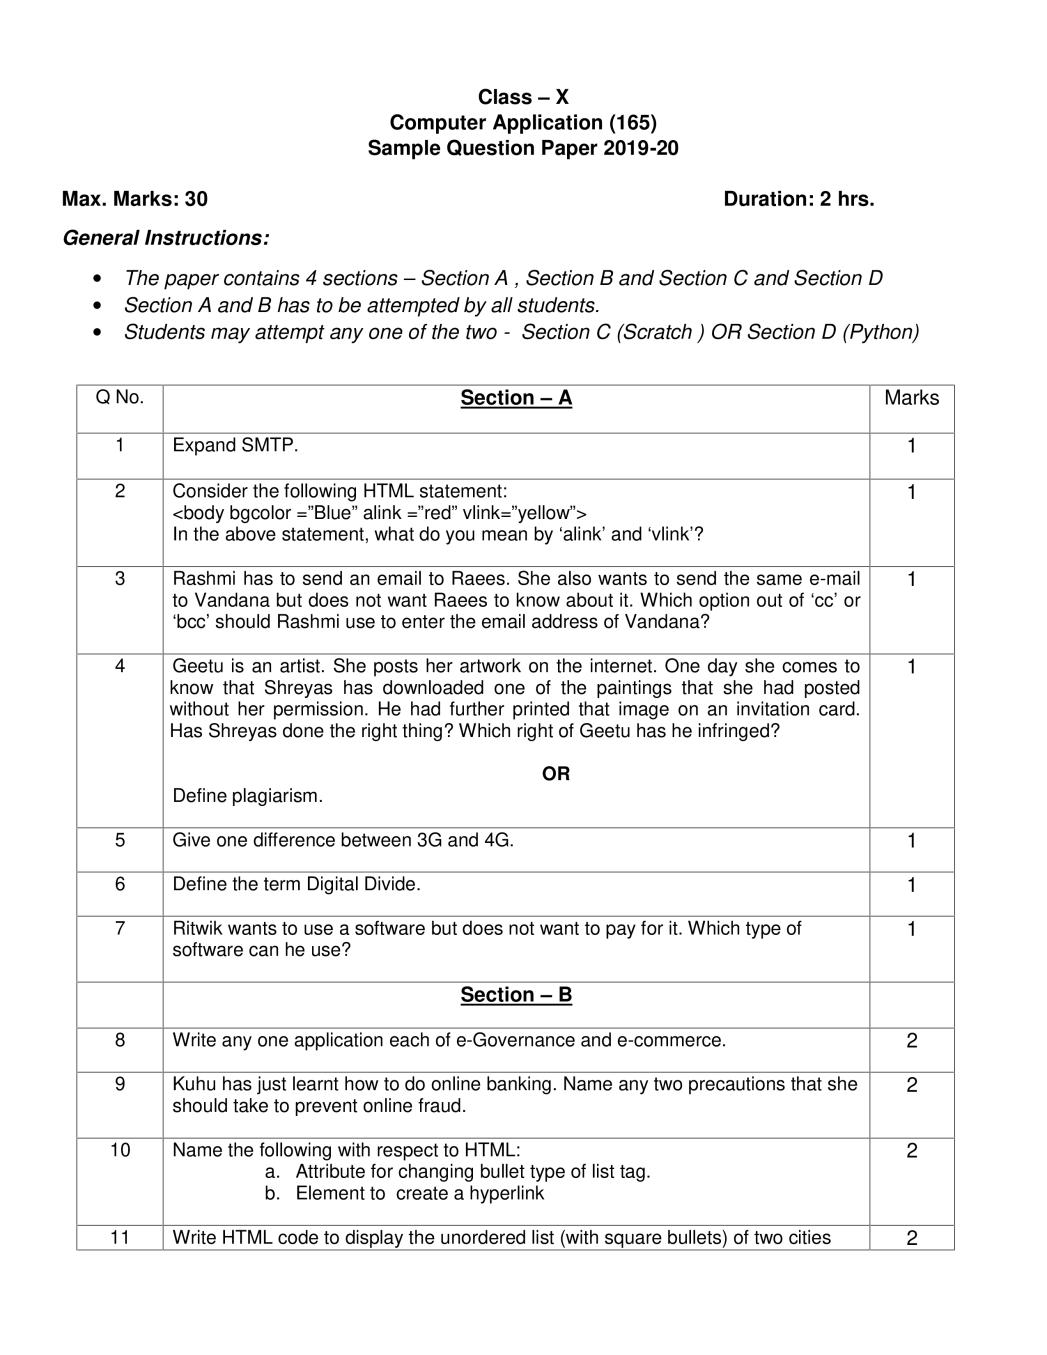 CBSE Class 10 Sample Paper 2020 for Computer Application - Page 1